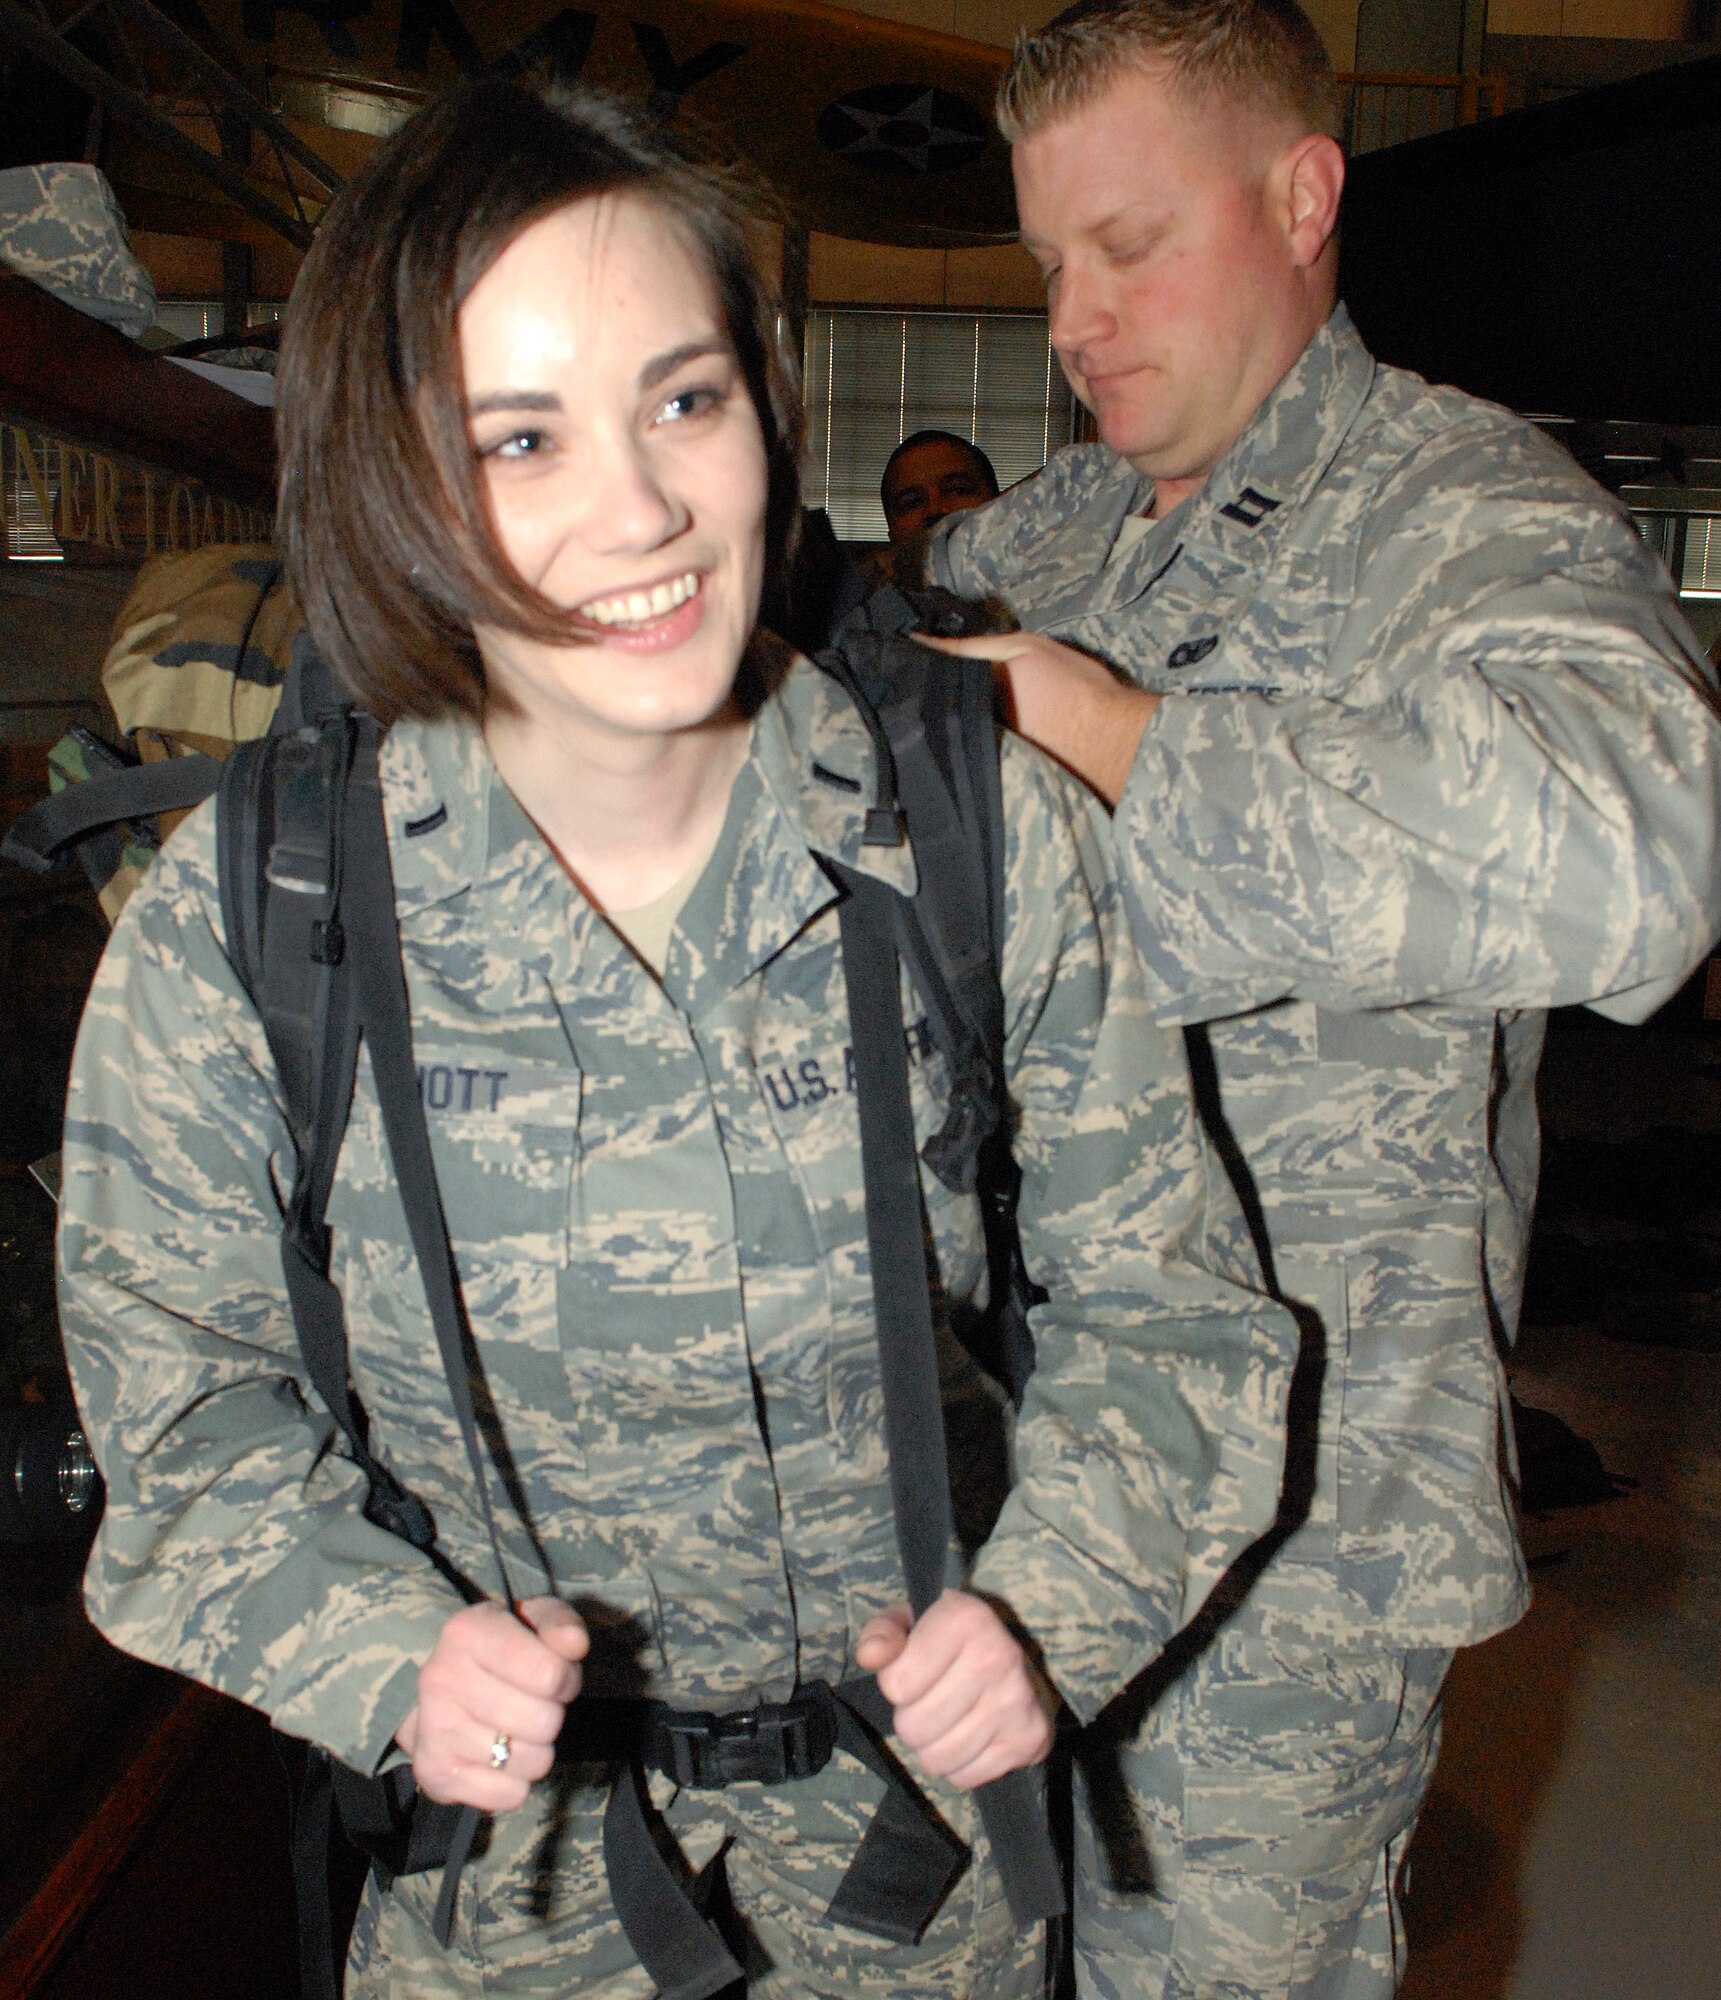 Capt. Erik Deshane, 436th Security Forces Squadron operations officer, helps 1st Lt. Amanda Elliott, 436th Mission Support Group executive officer, strap on her rucksack, Feb. 26 2011, during the 12th Annual Ruck March at the Airlift Mobility Command museum, Dover Air Force Base, Del.  